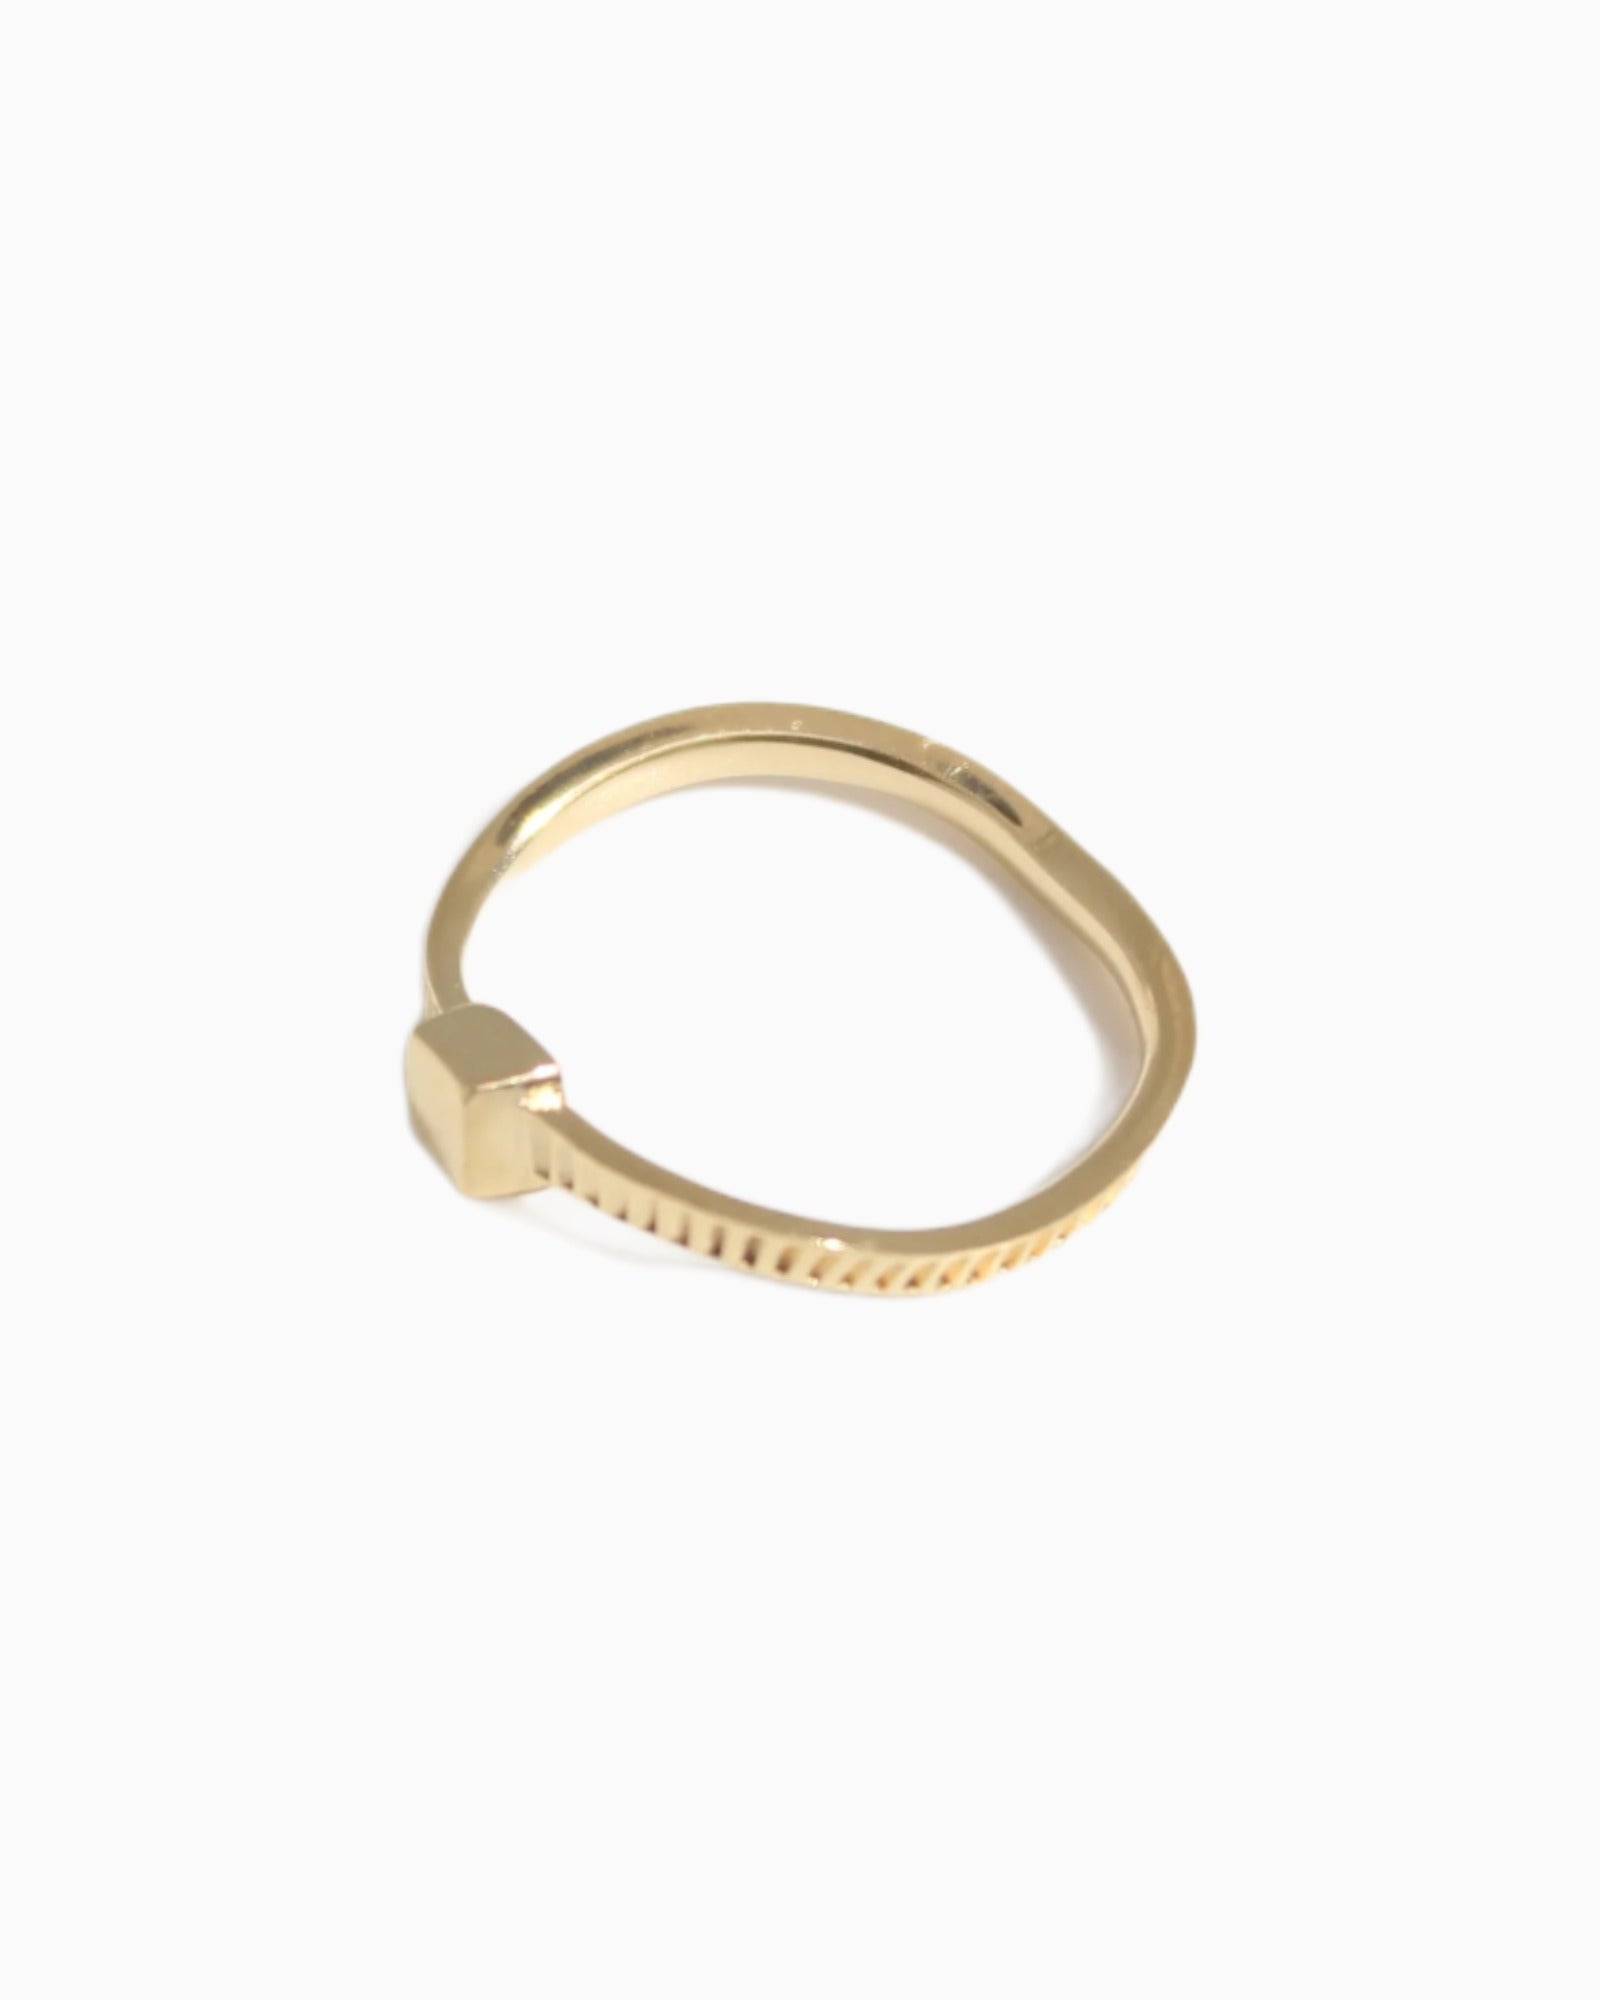 Swiss made Simple gold ring Wavy with 10 micron gold